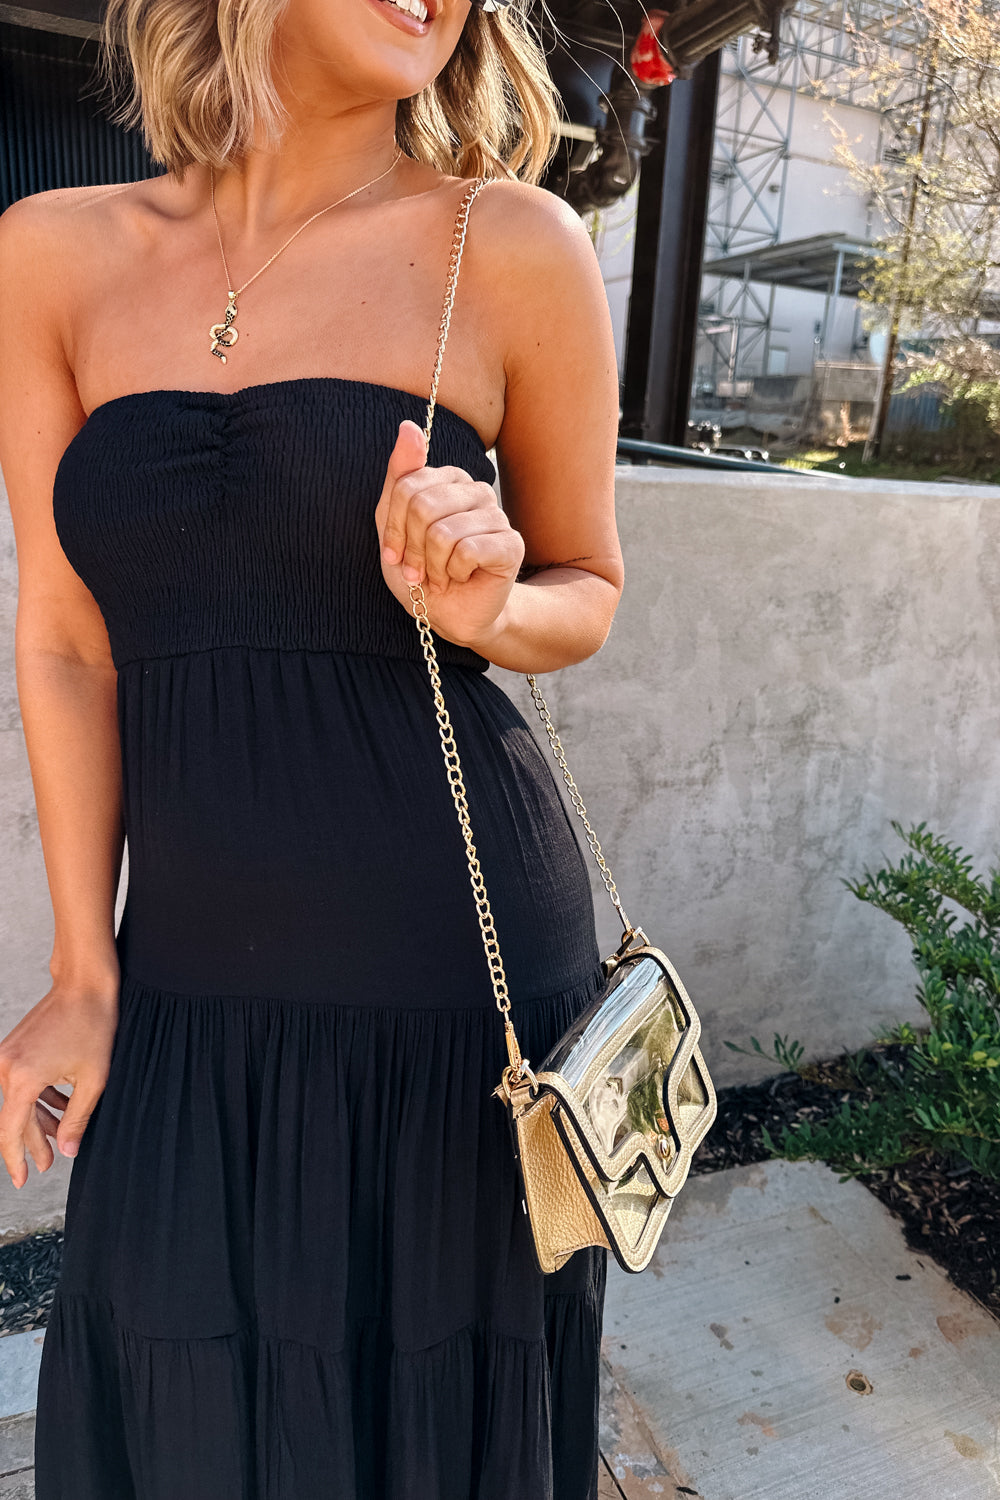 Side view of female model wearing the Miley Clear Purse in Gold which features clear with leather details, gold snap closure, and an adjustable gold chain strap with gold details.